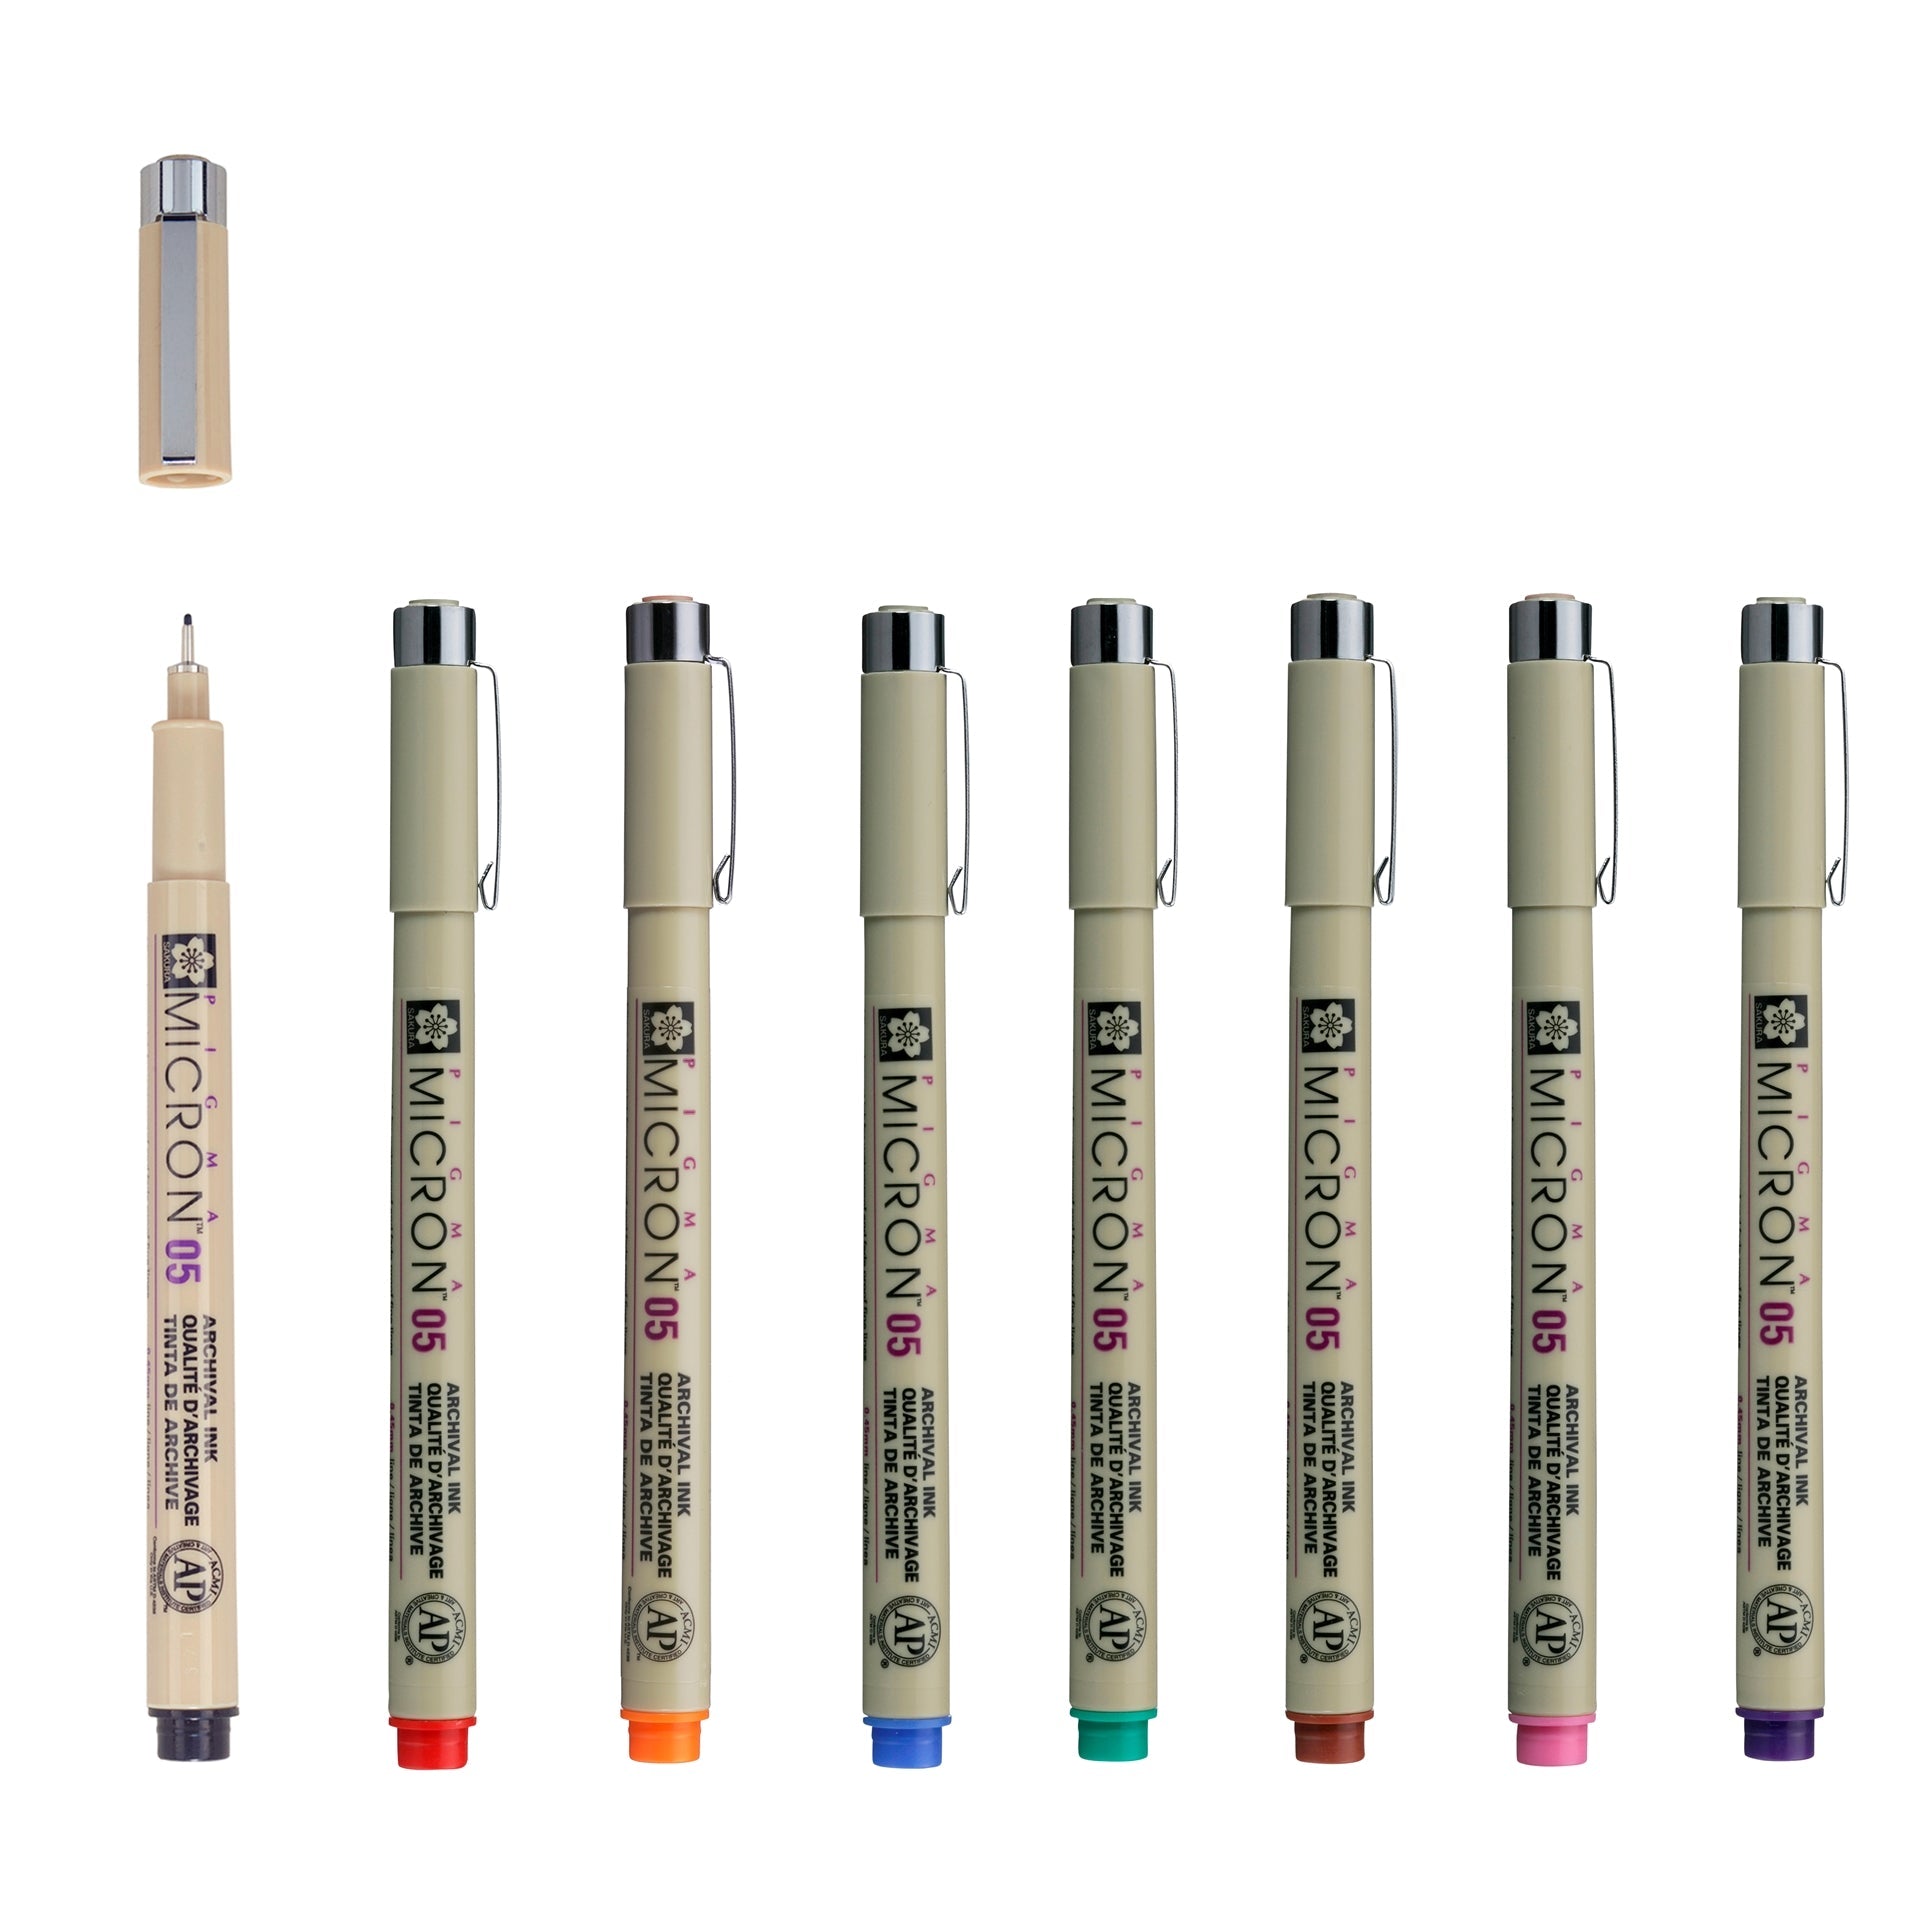 nam sword pen Gel Pen - Buy nam sword pen Gel Pen - Gel Pen Online at Best  Prices in India Only at